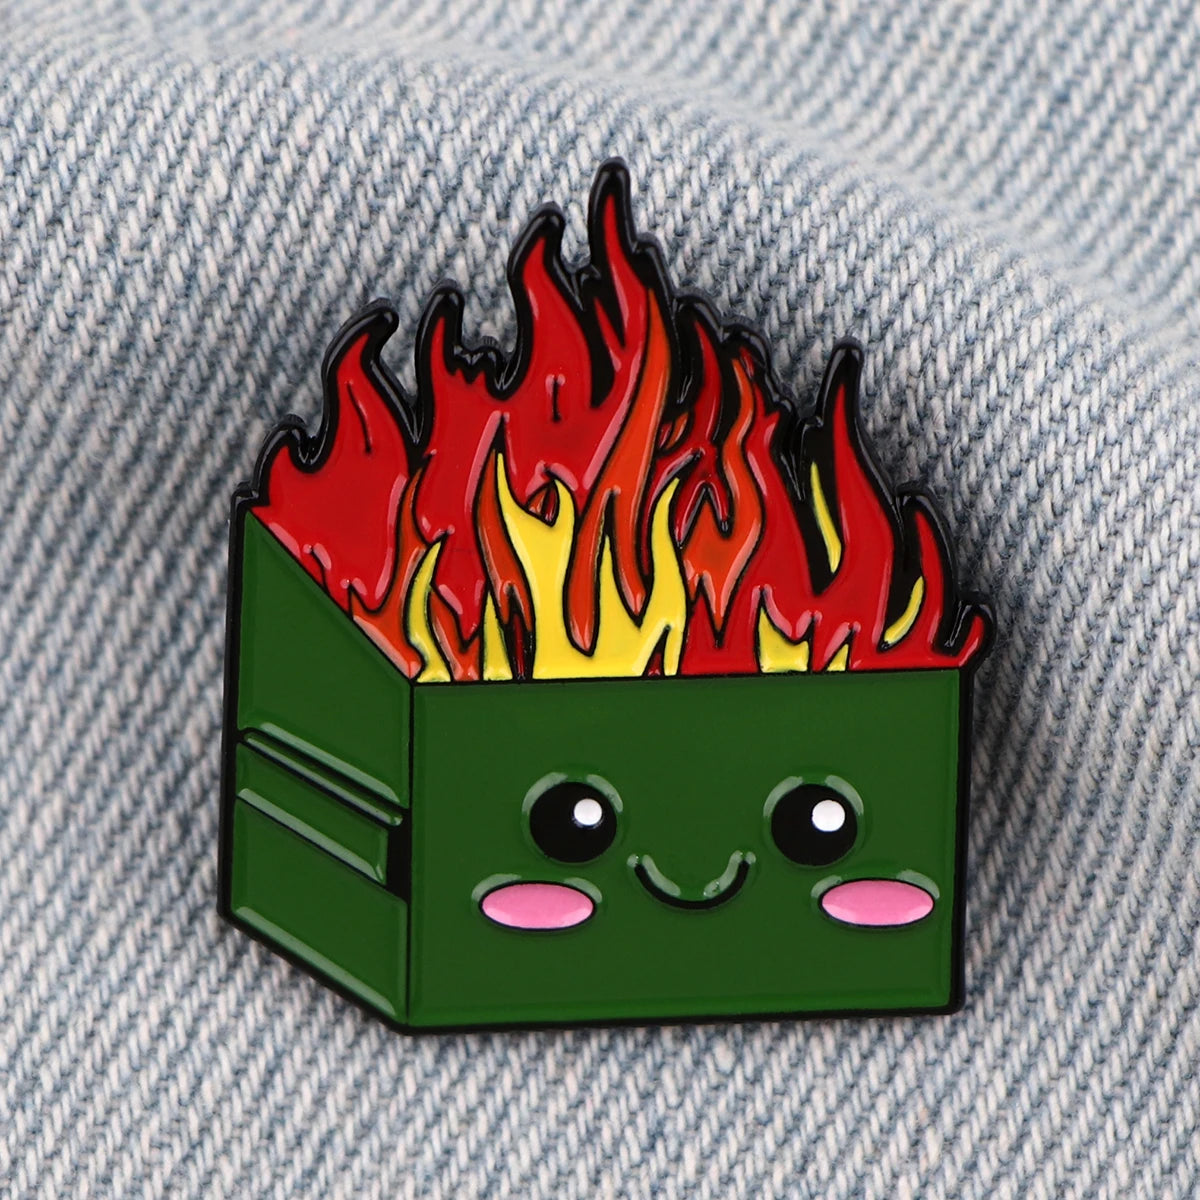 Enamel Pin - Sarcastic - Funny - Dumpster Fire Pin